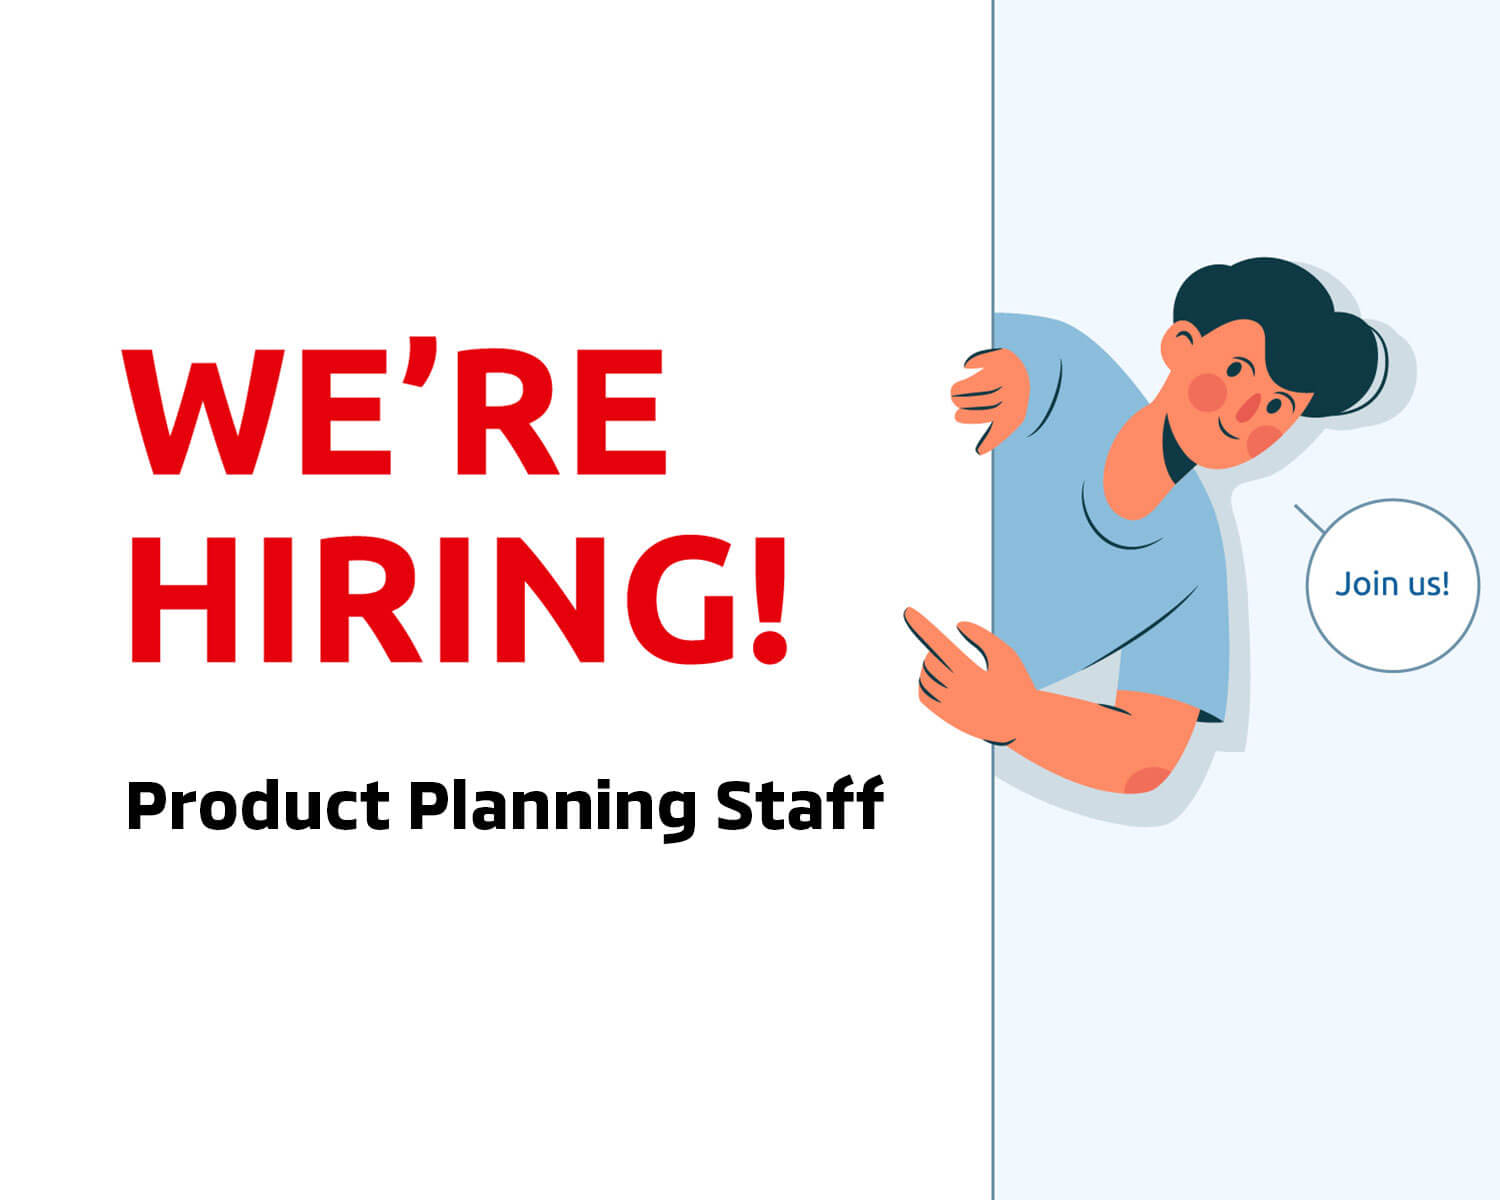 TUYỂN DỤNG: PRODUCT PLANNING STAFF